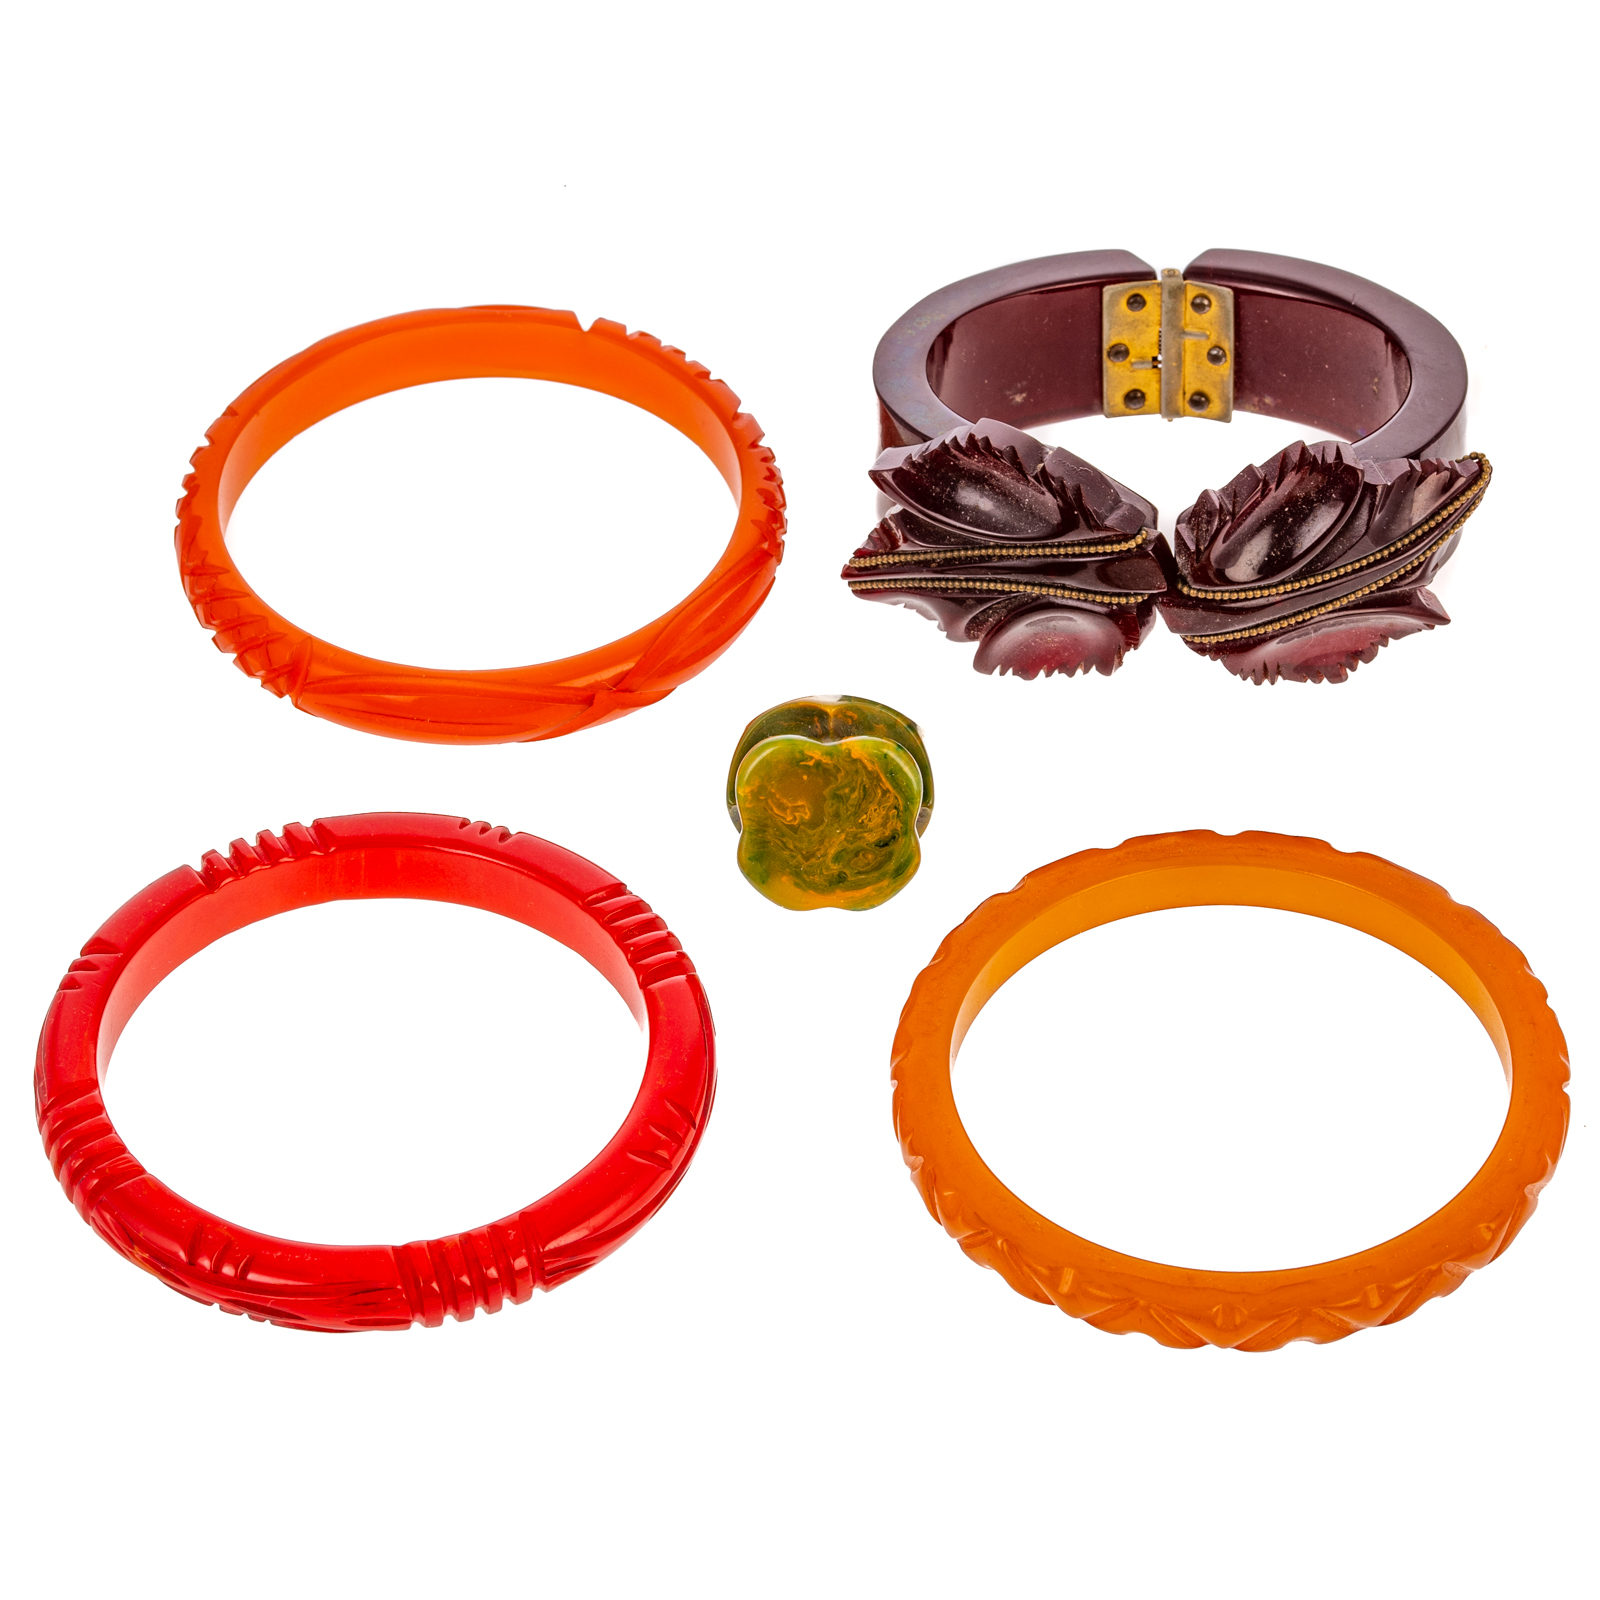 A COLORFUL COLLECTION OF BAKELITE 338657